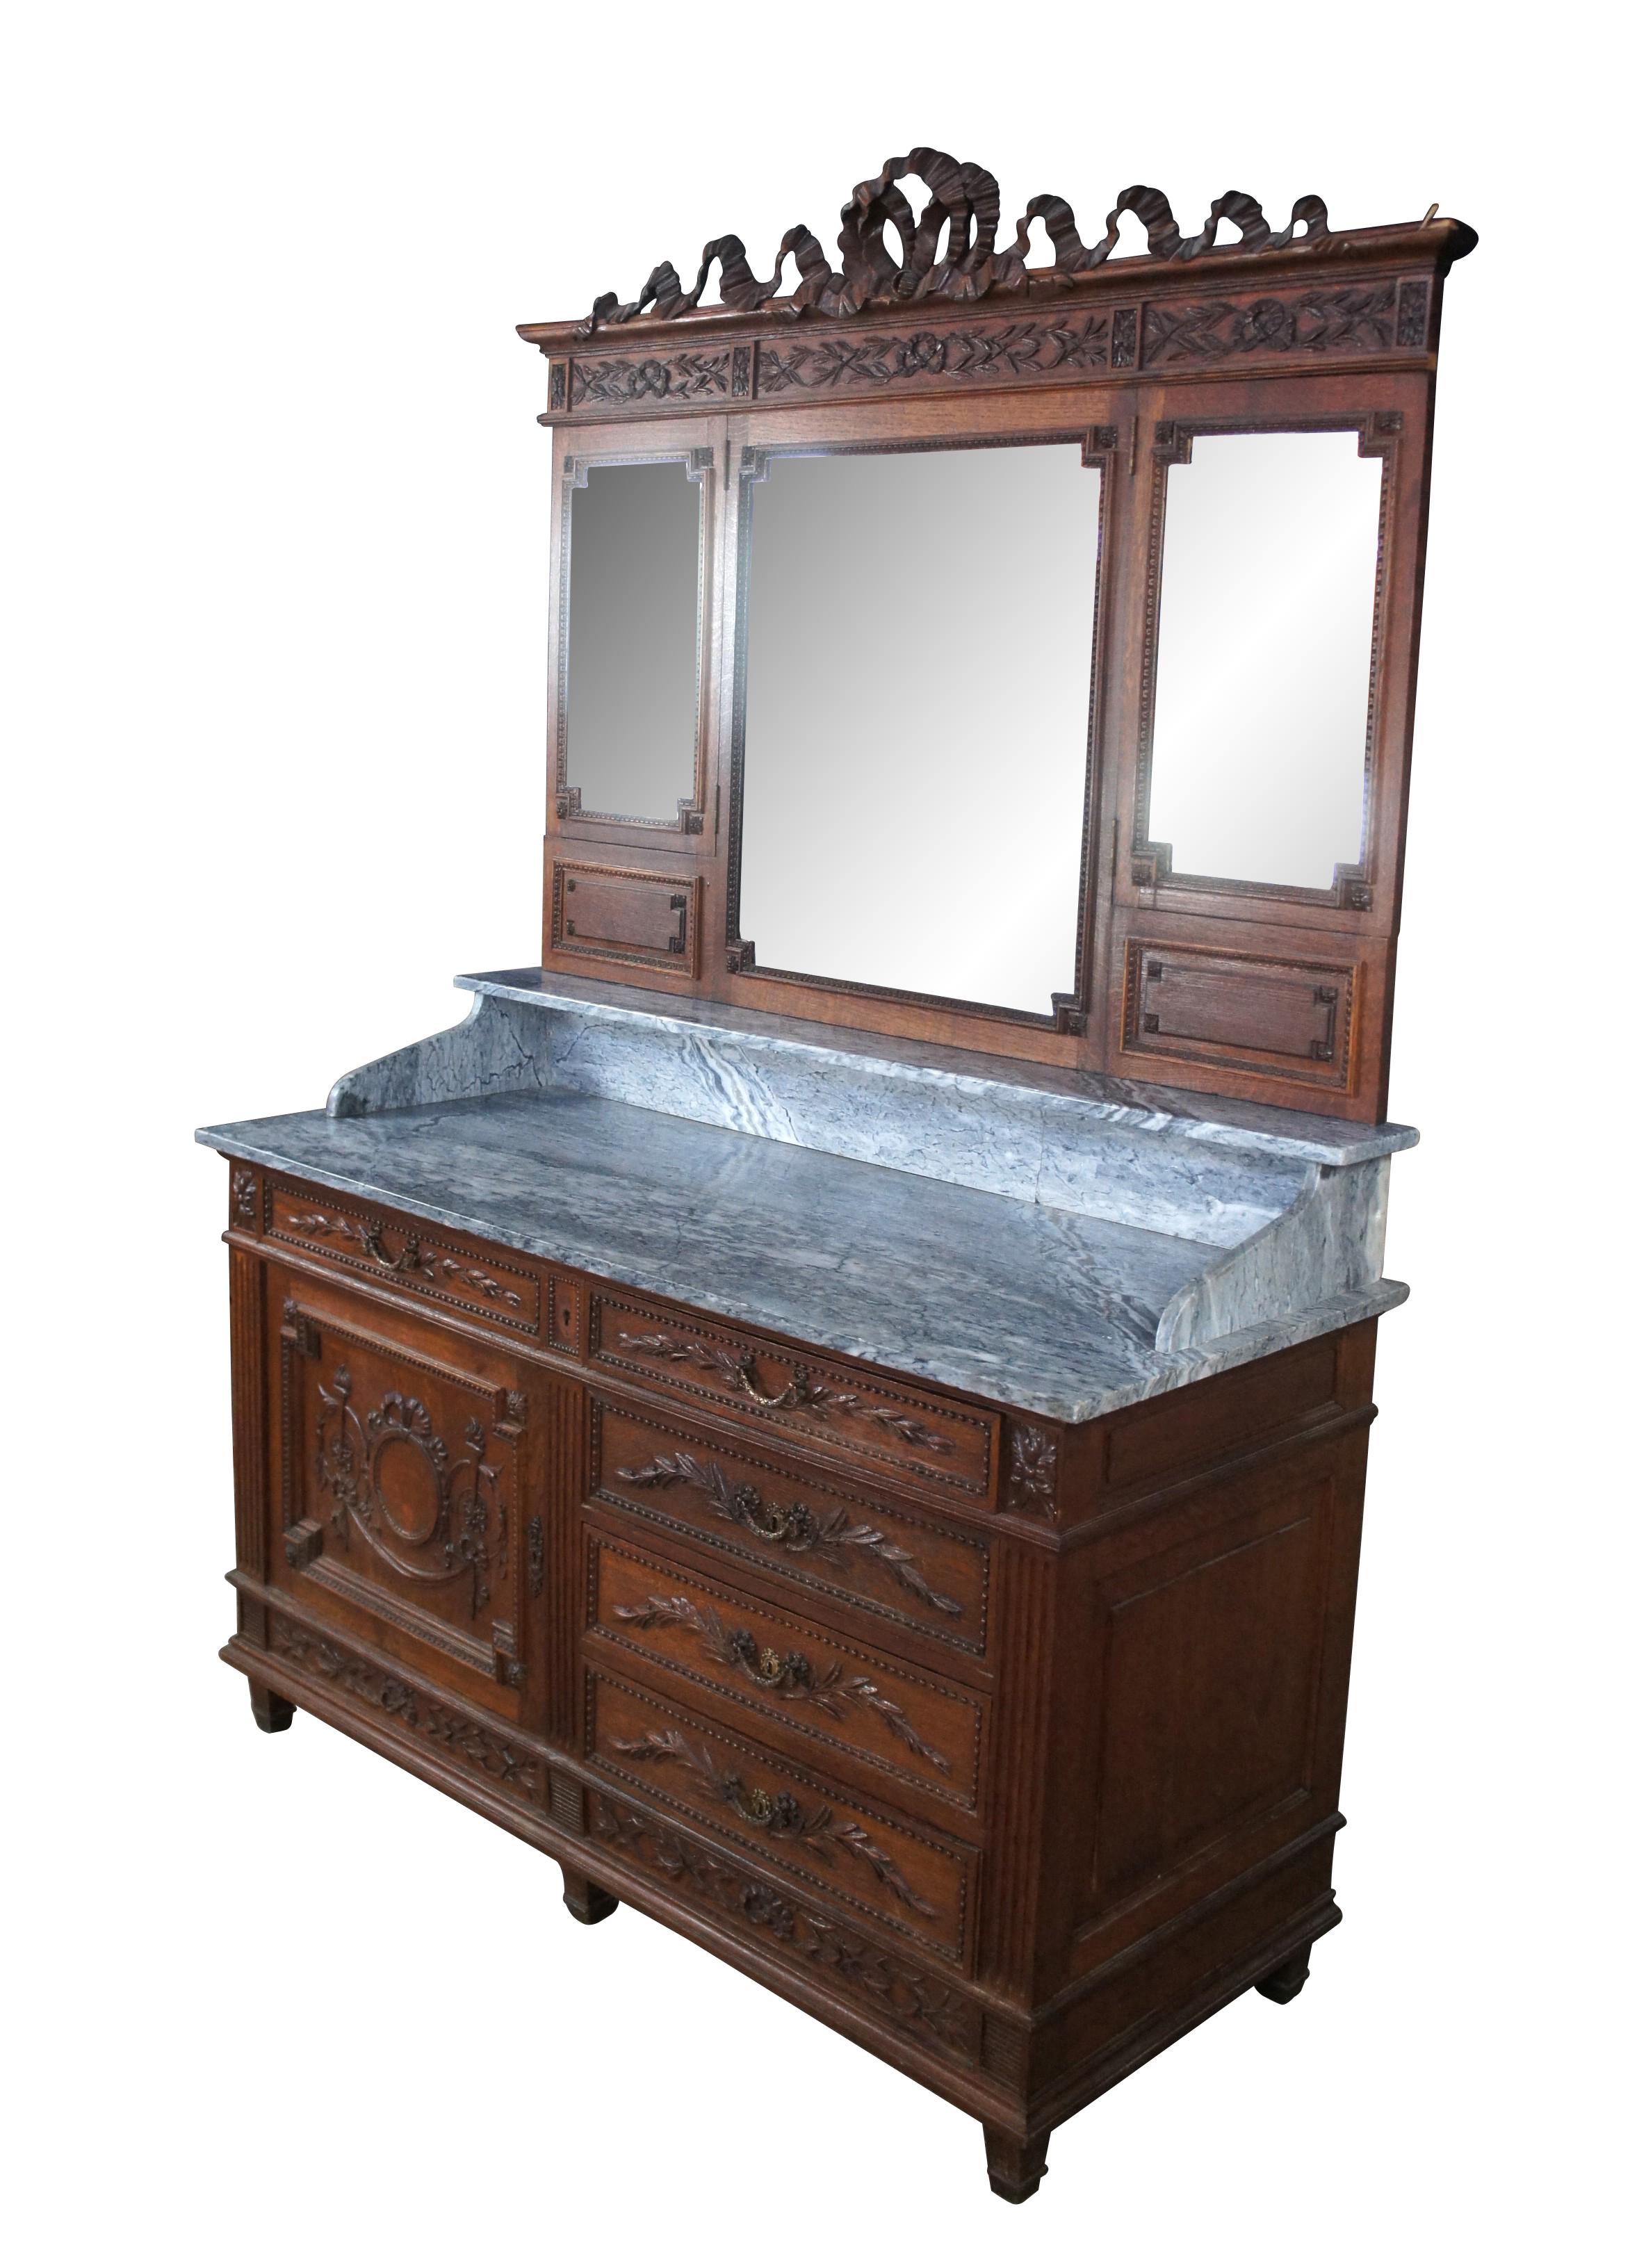 Antique French Neoclassical Oak Marble Mirrored Dresser Sideboard Buffet Server In Fair Condition For Sale In Dayton, OH